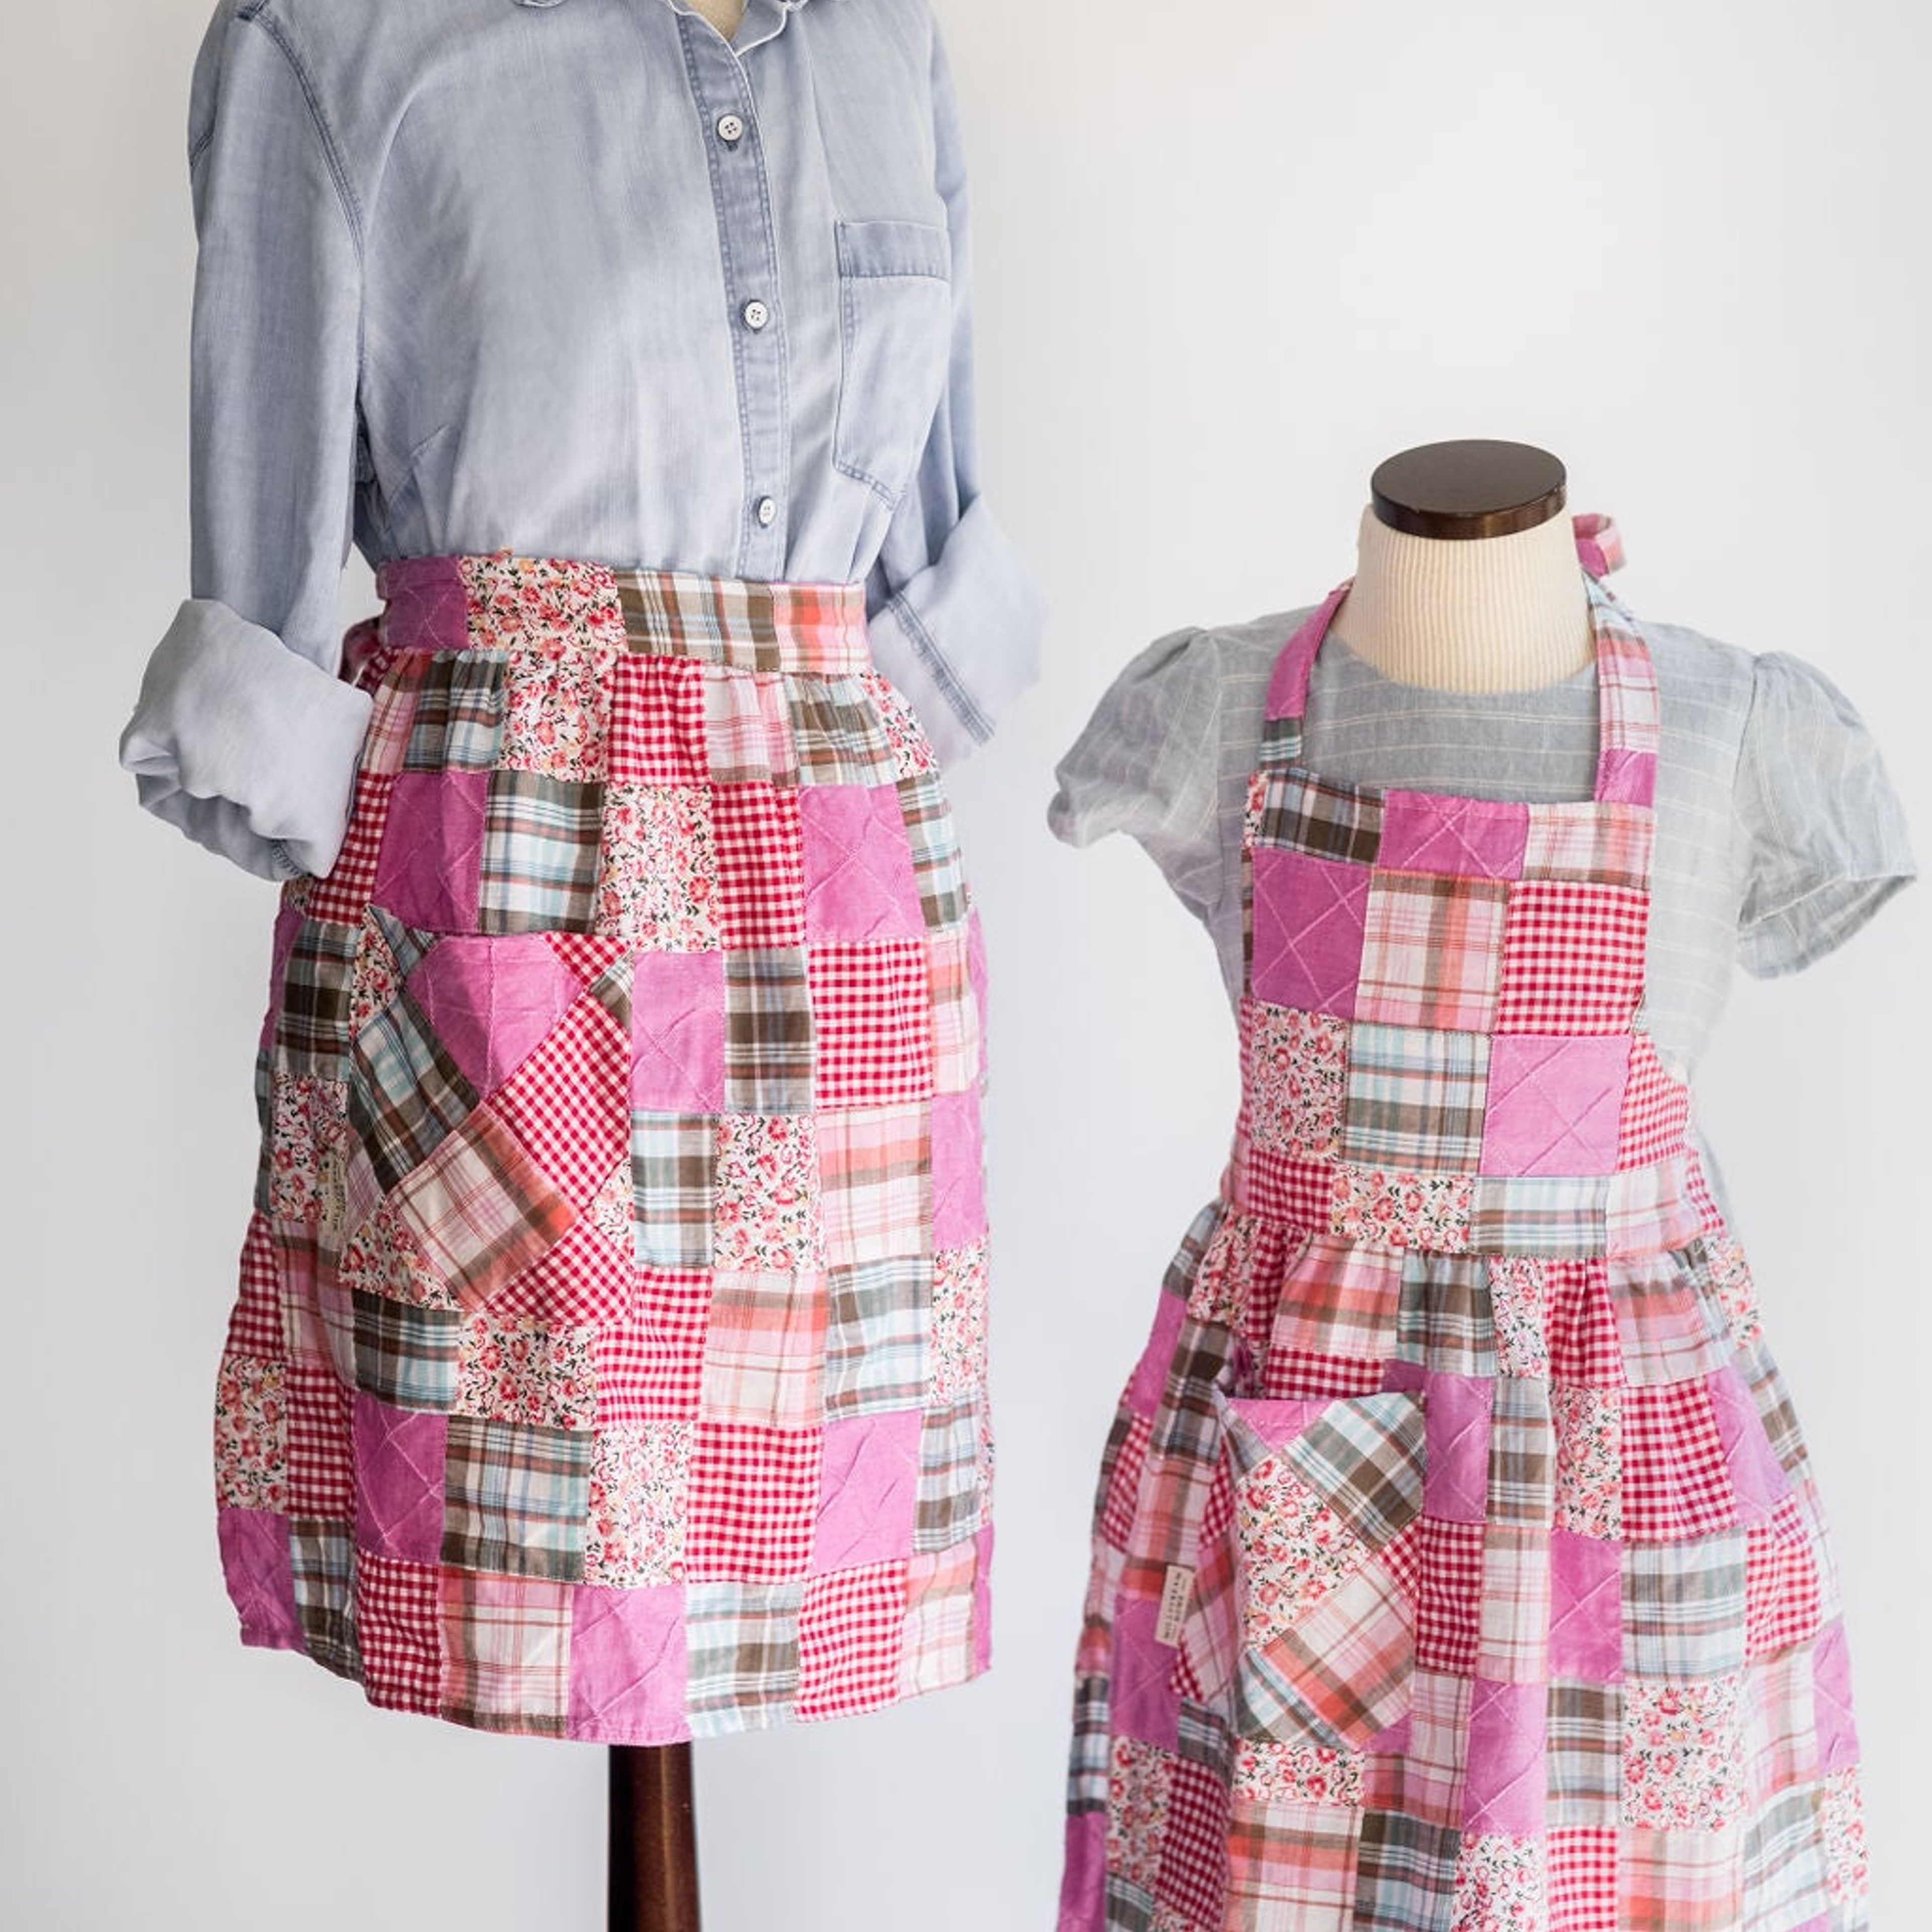 The Adult Quilted Patchwork Apron